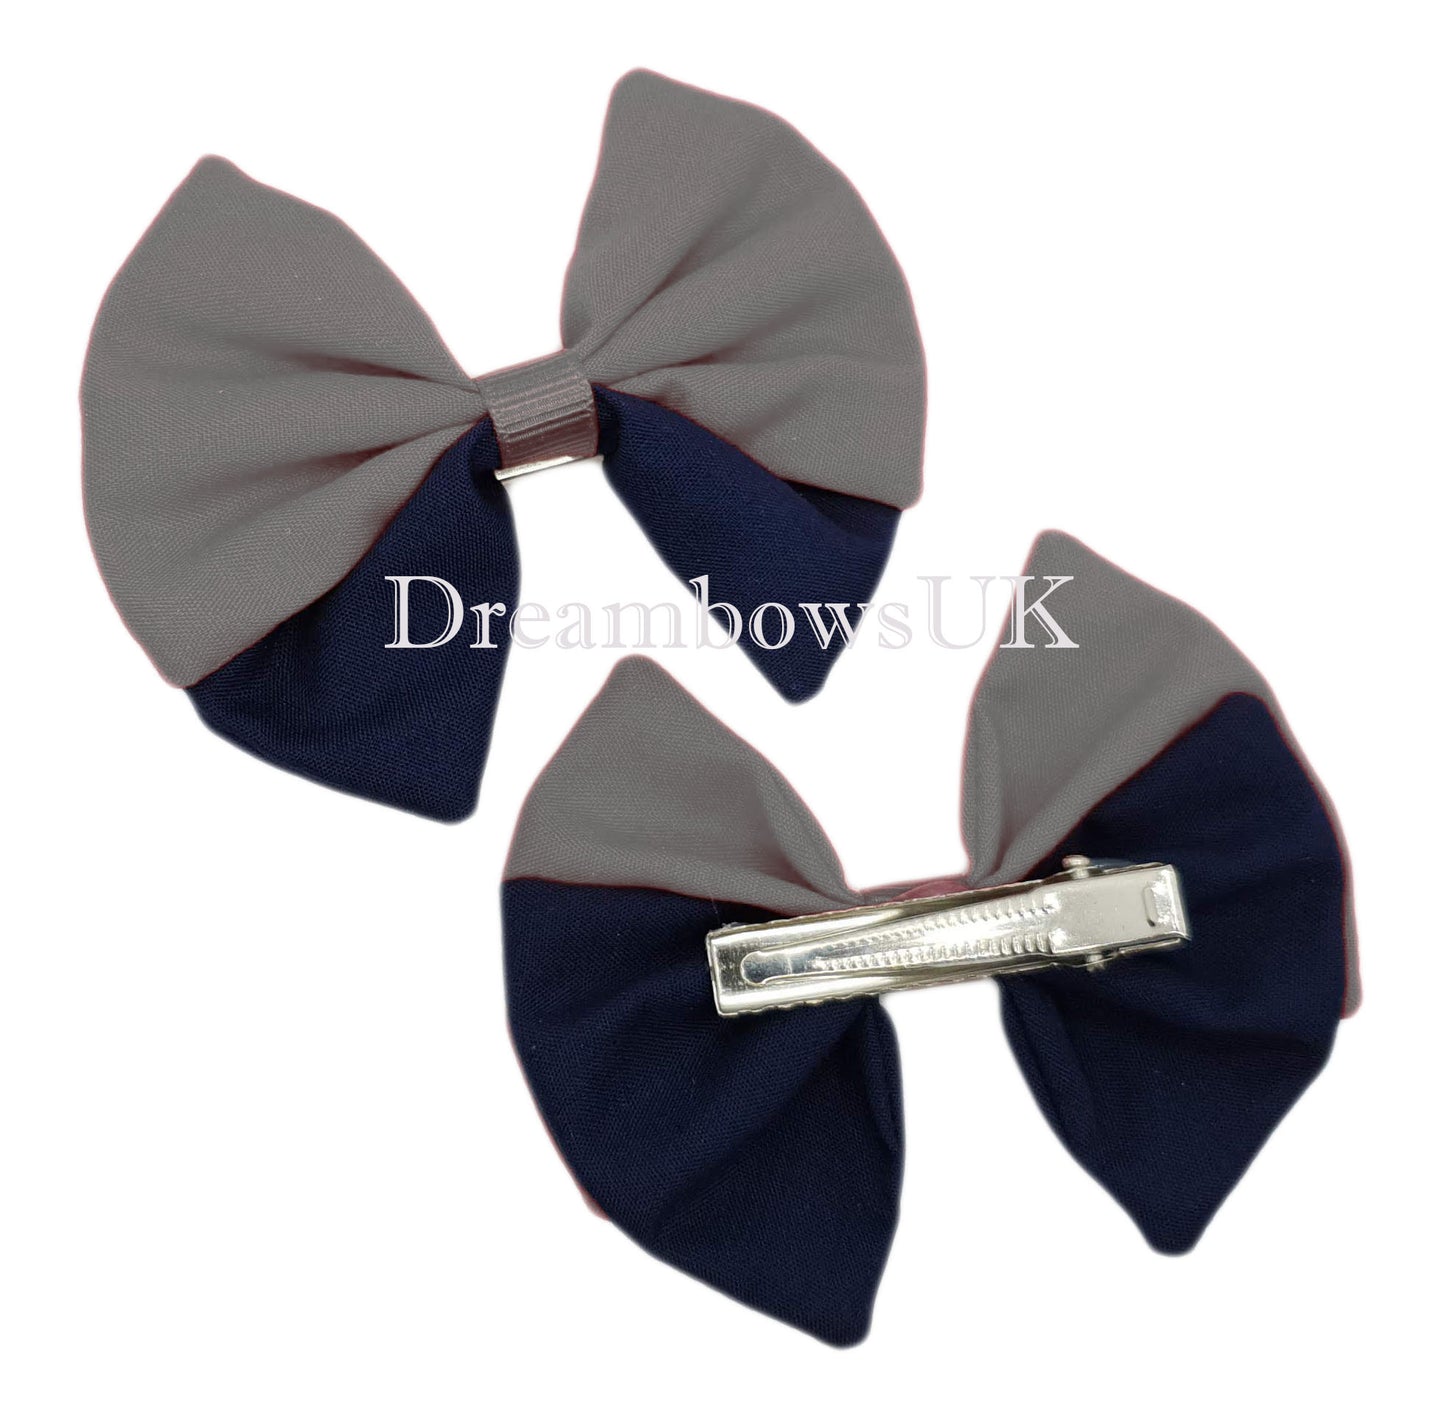 2x Navy blue and grey fabric hair bows